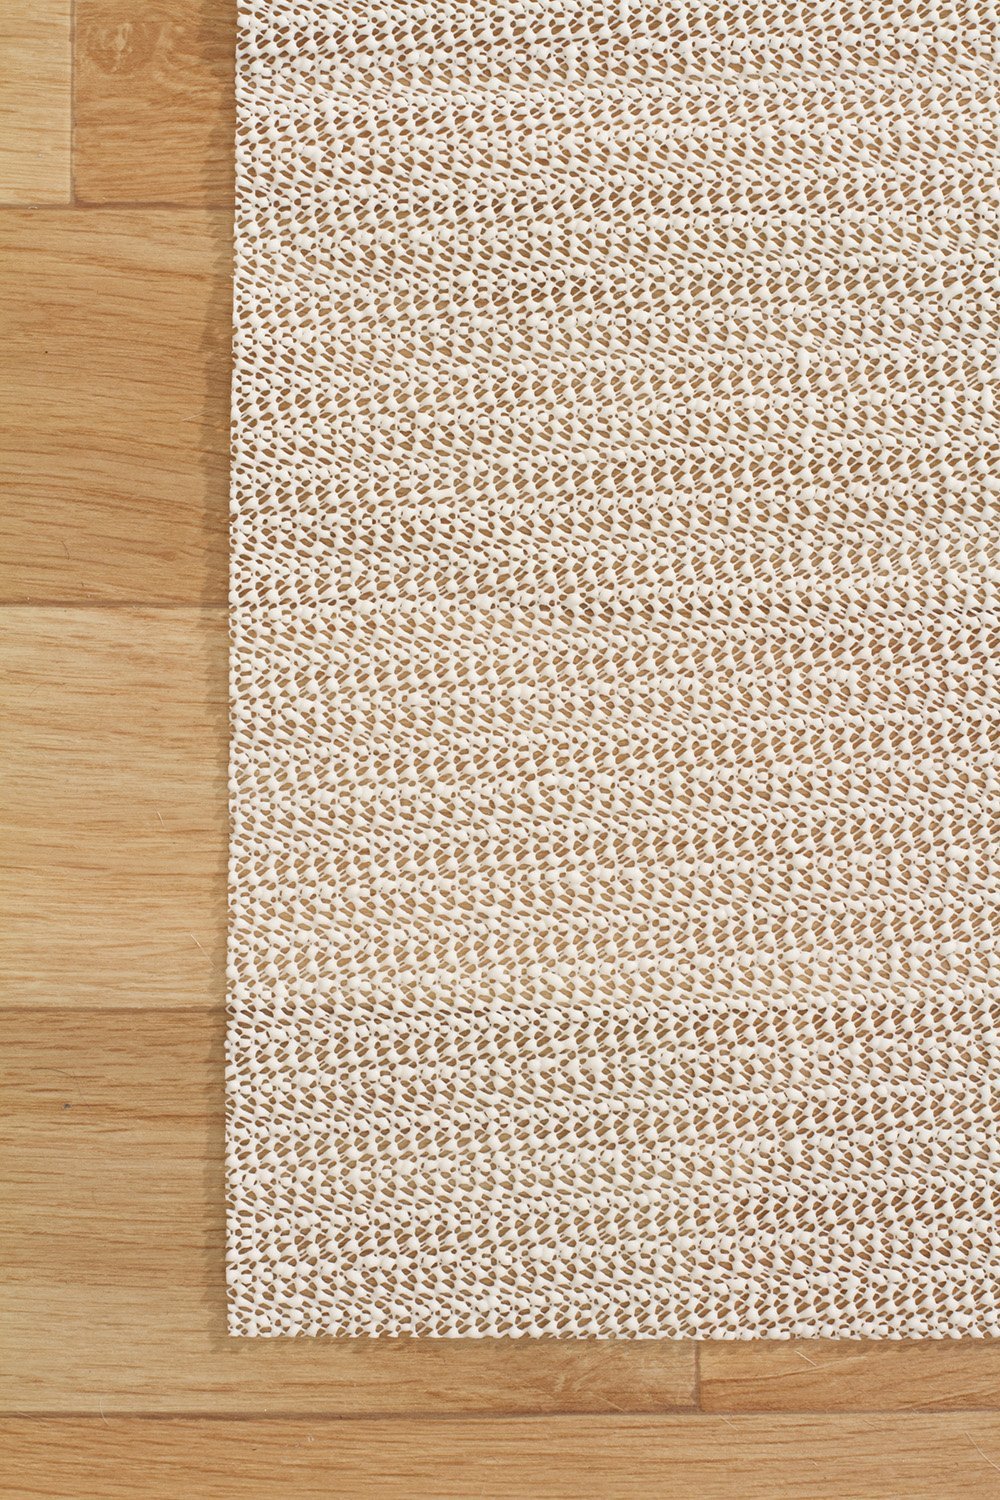 Total Grip for Wooden/Hard Floors - Click Rugs